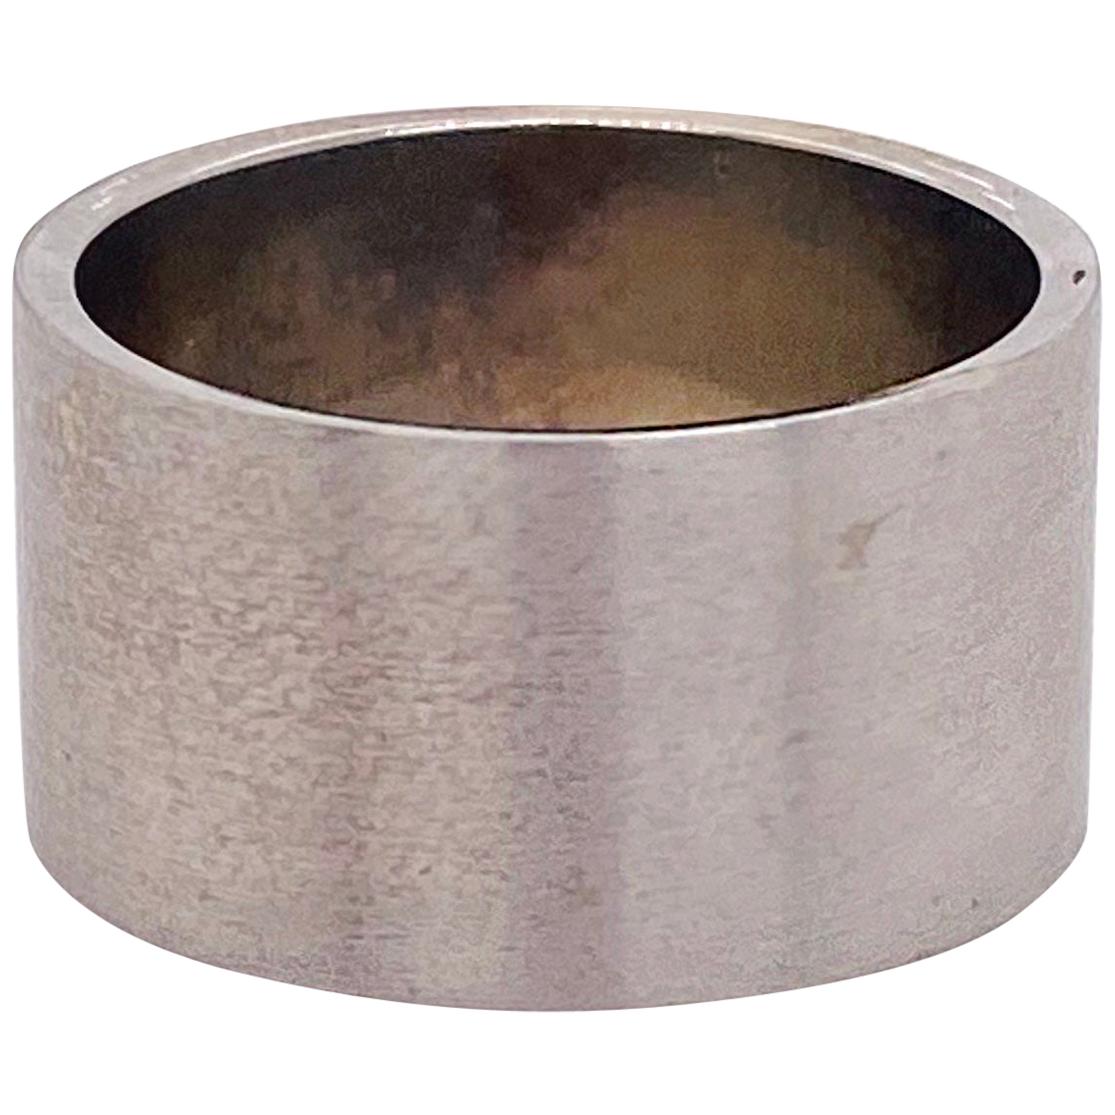 Cigar Band Ring with Satin Finish, White Gold, Flat Band For Sale